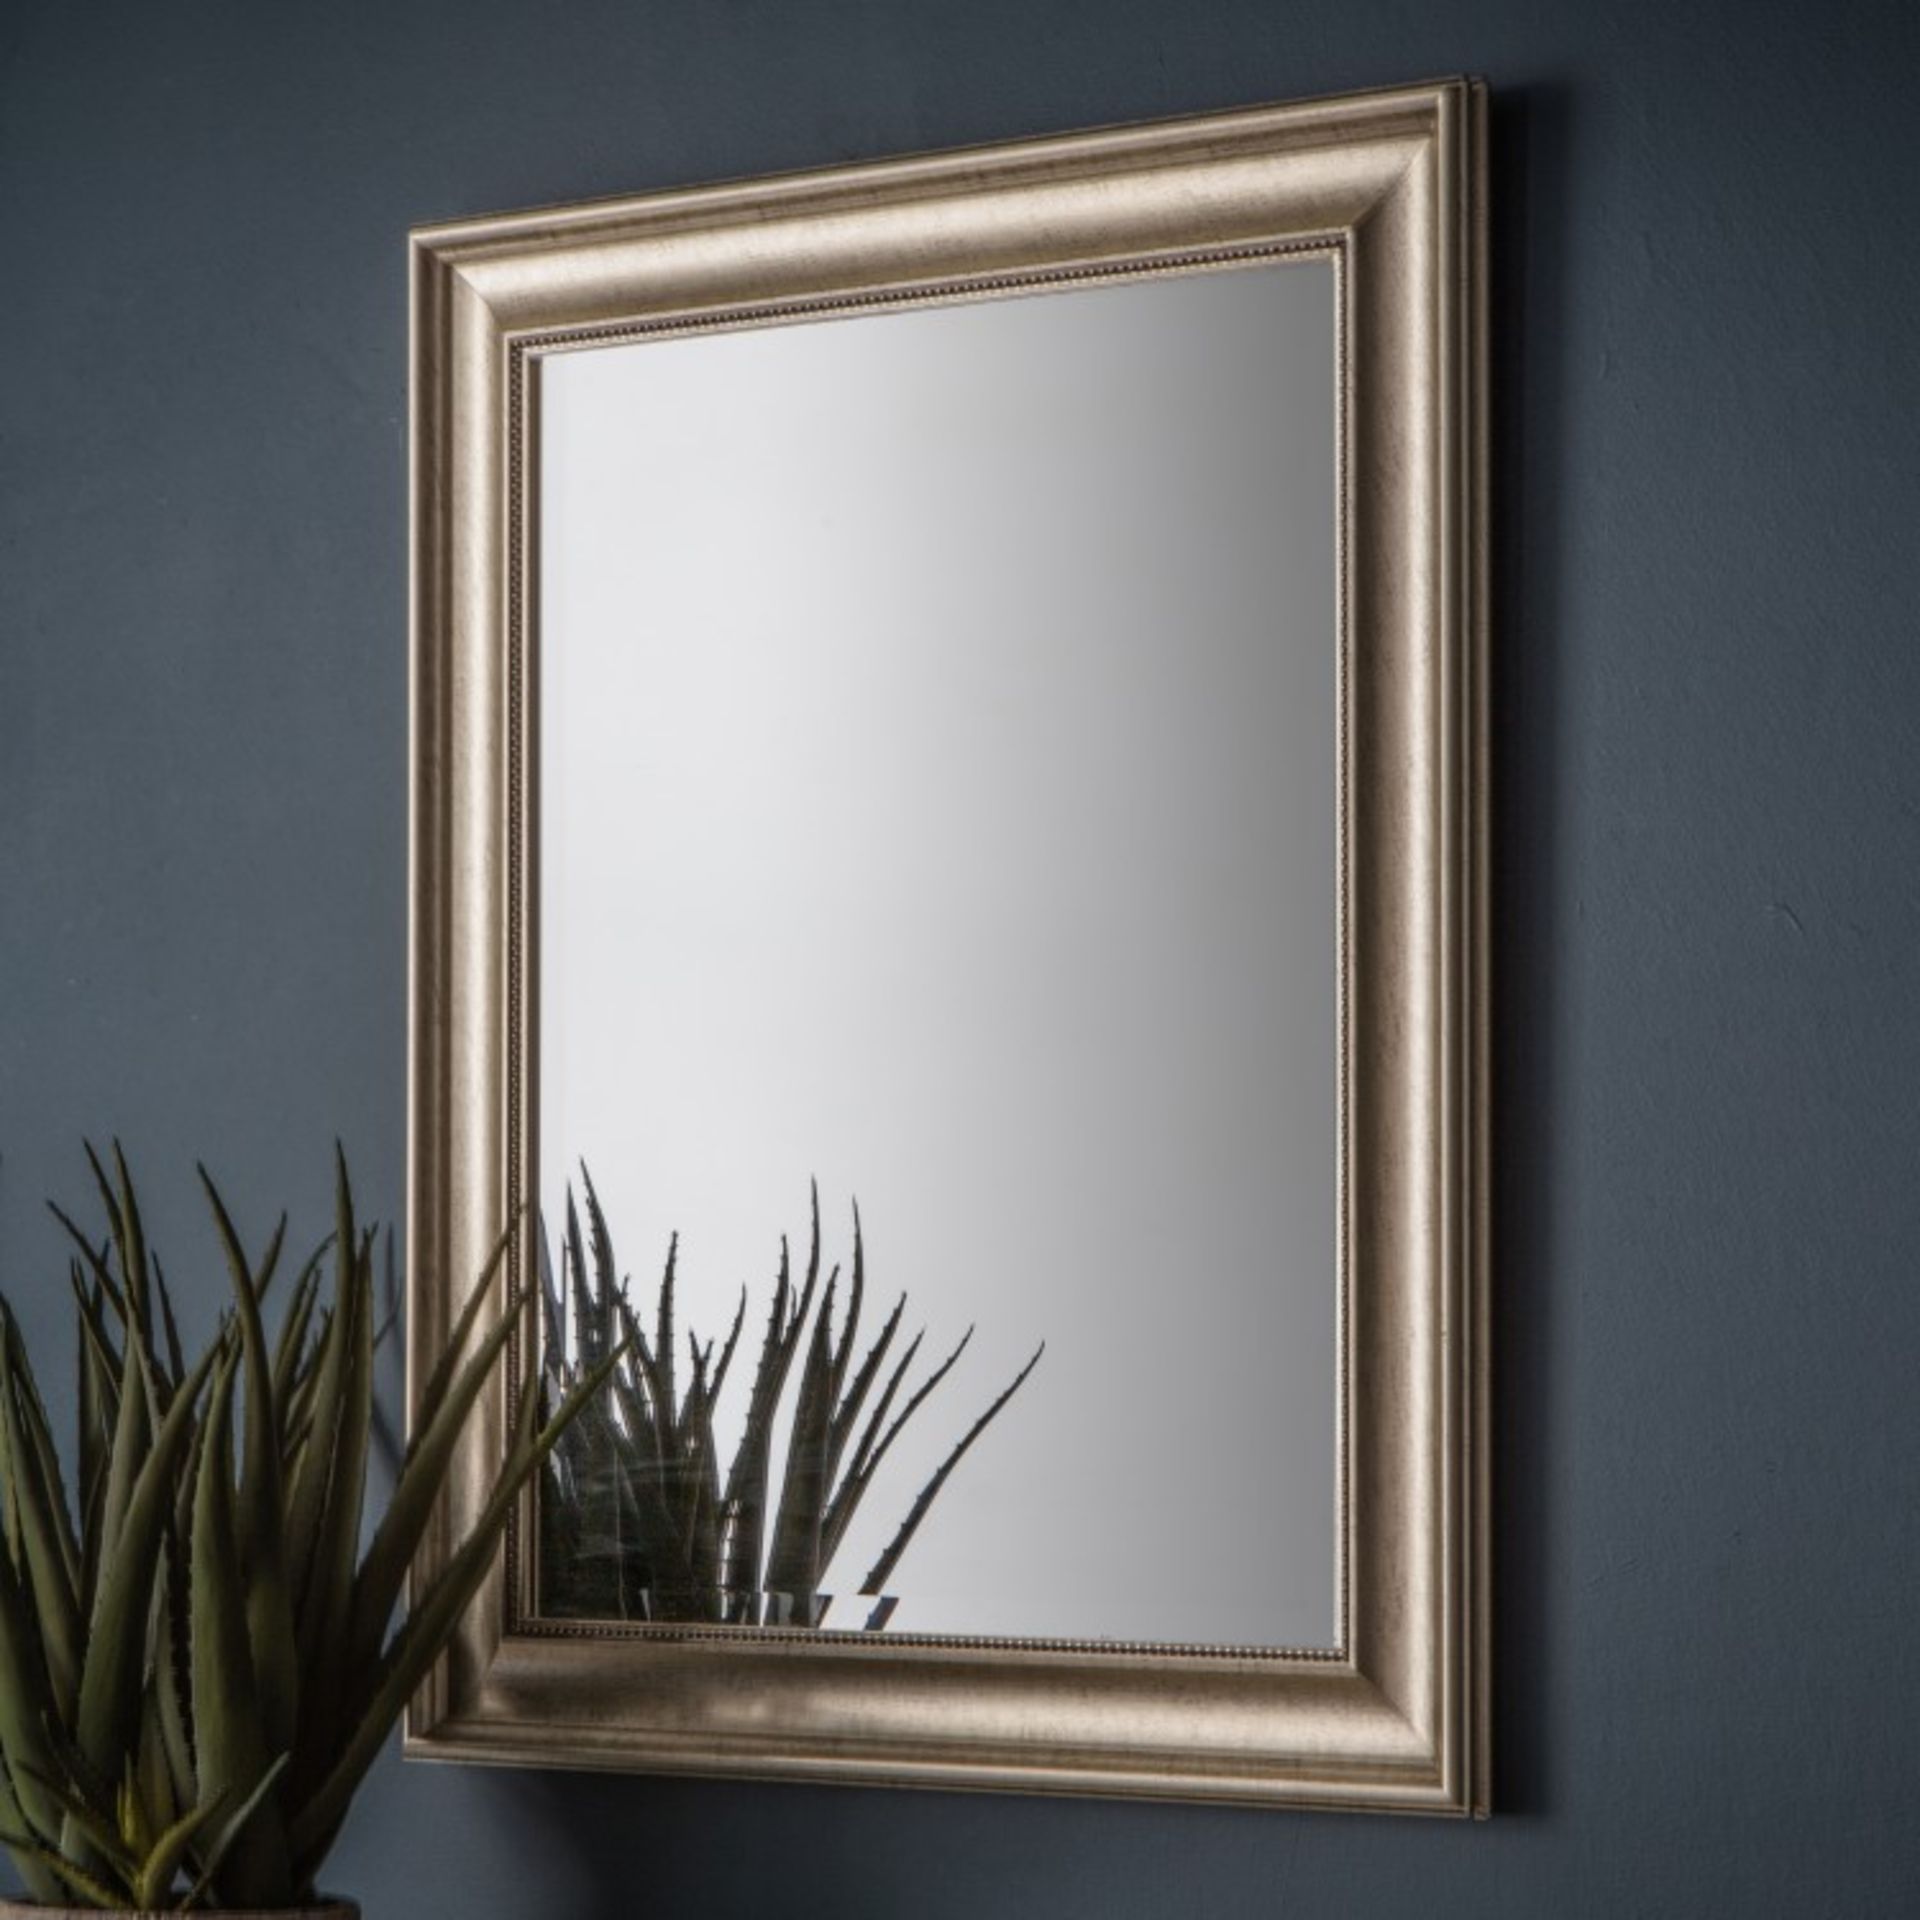 Presley Mirror Antique Silver 740 X 1040mm A Classic Accent Mirror Finished In Antique Silver